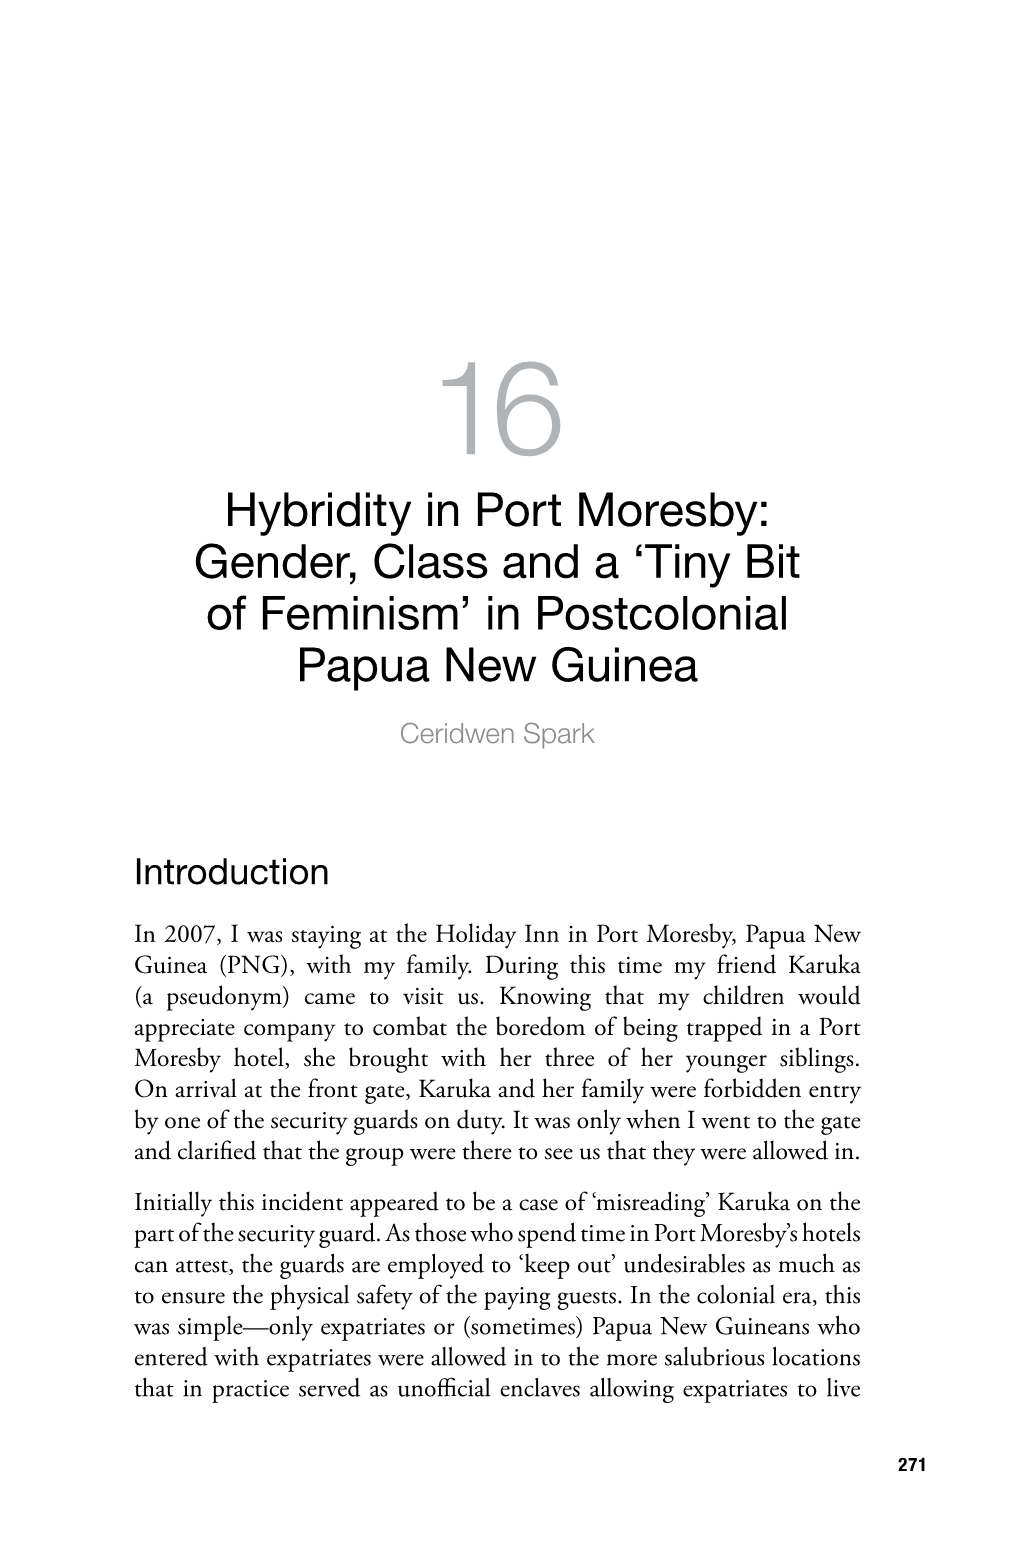 Hybridity in Port Moresby: Gender, Class and a ‘Tiny Bit of Feminism’ in Postcolonial Papua New Guinea Ceridwen Spark